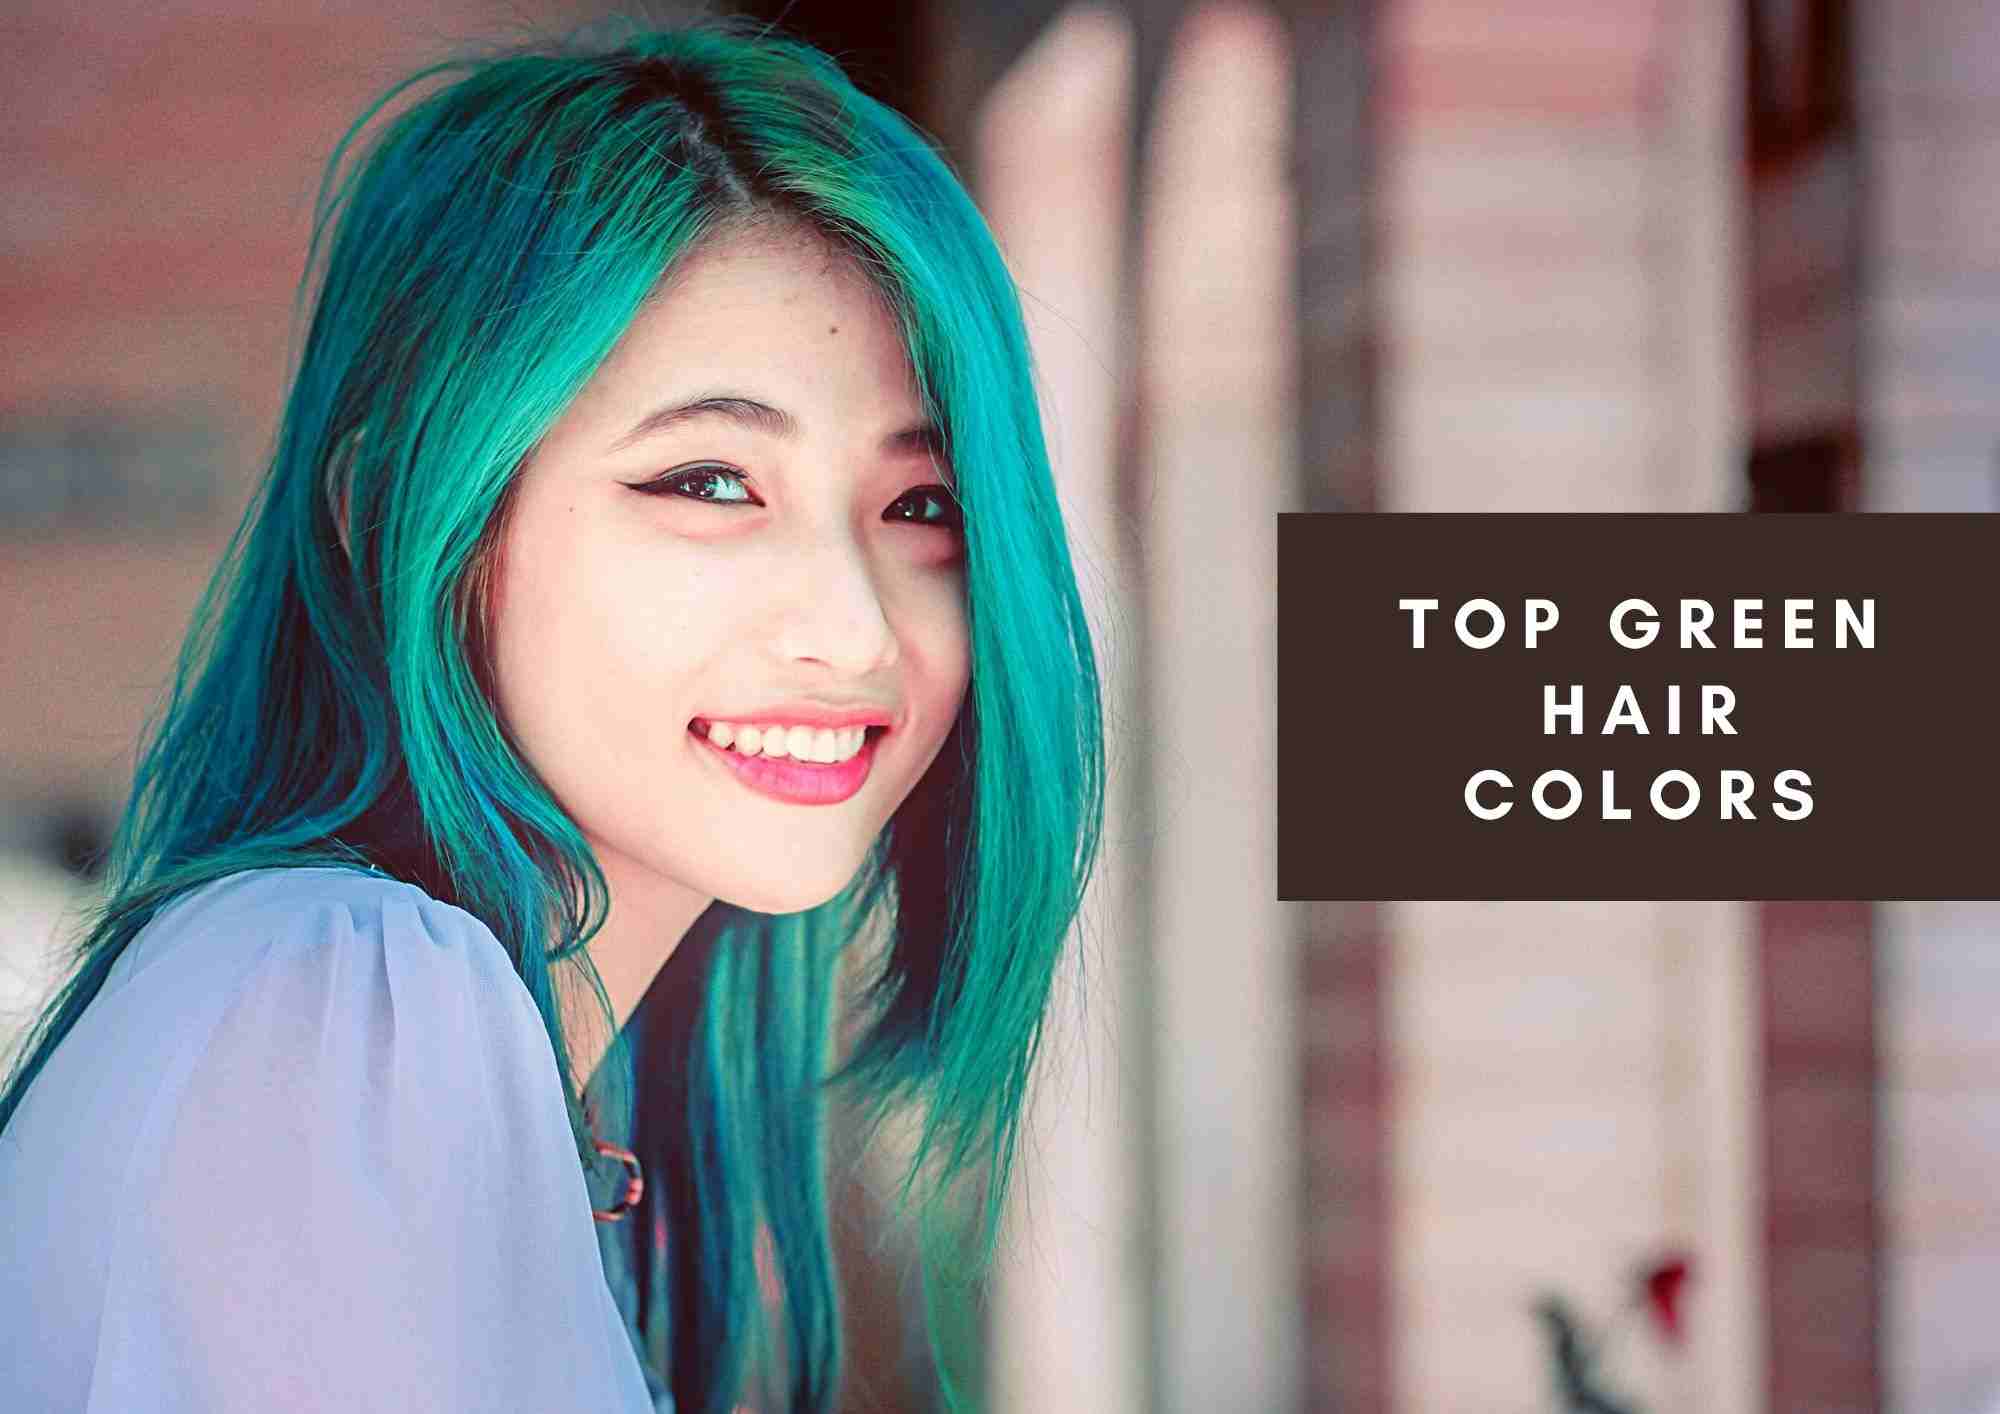 55 Vivid & Unique Hair Colors to Try in 2023 - Nerd About Town